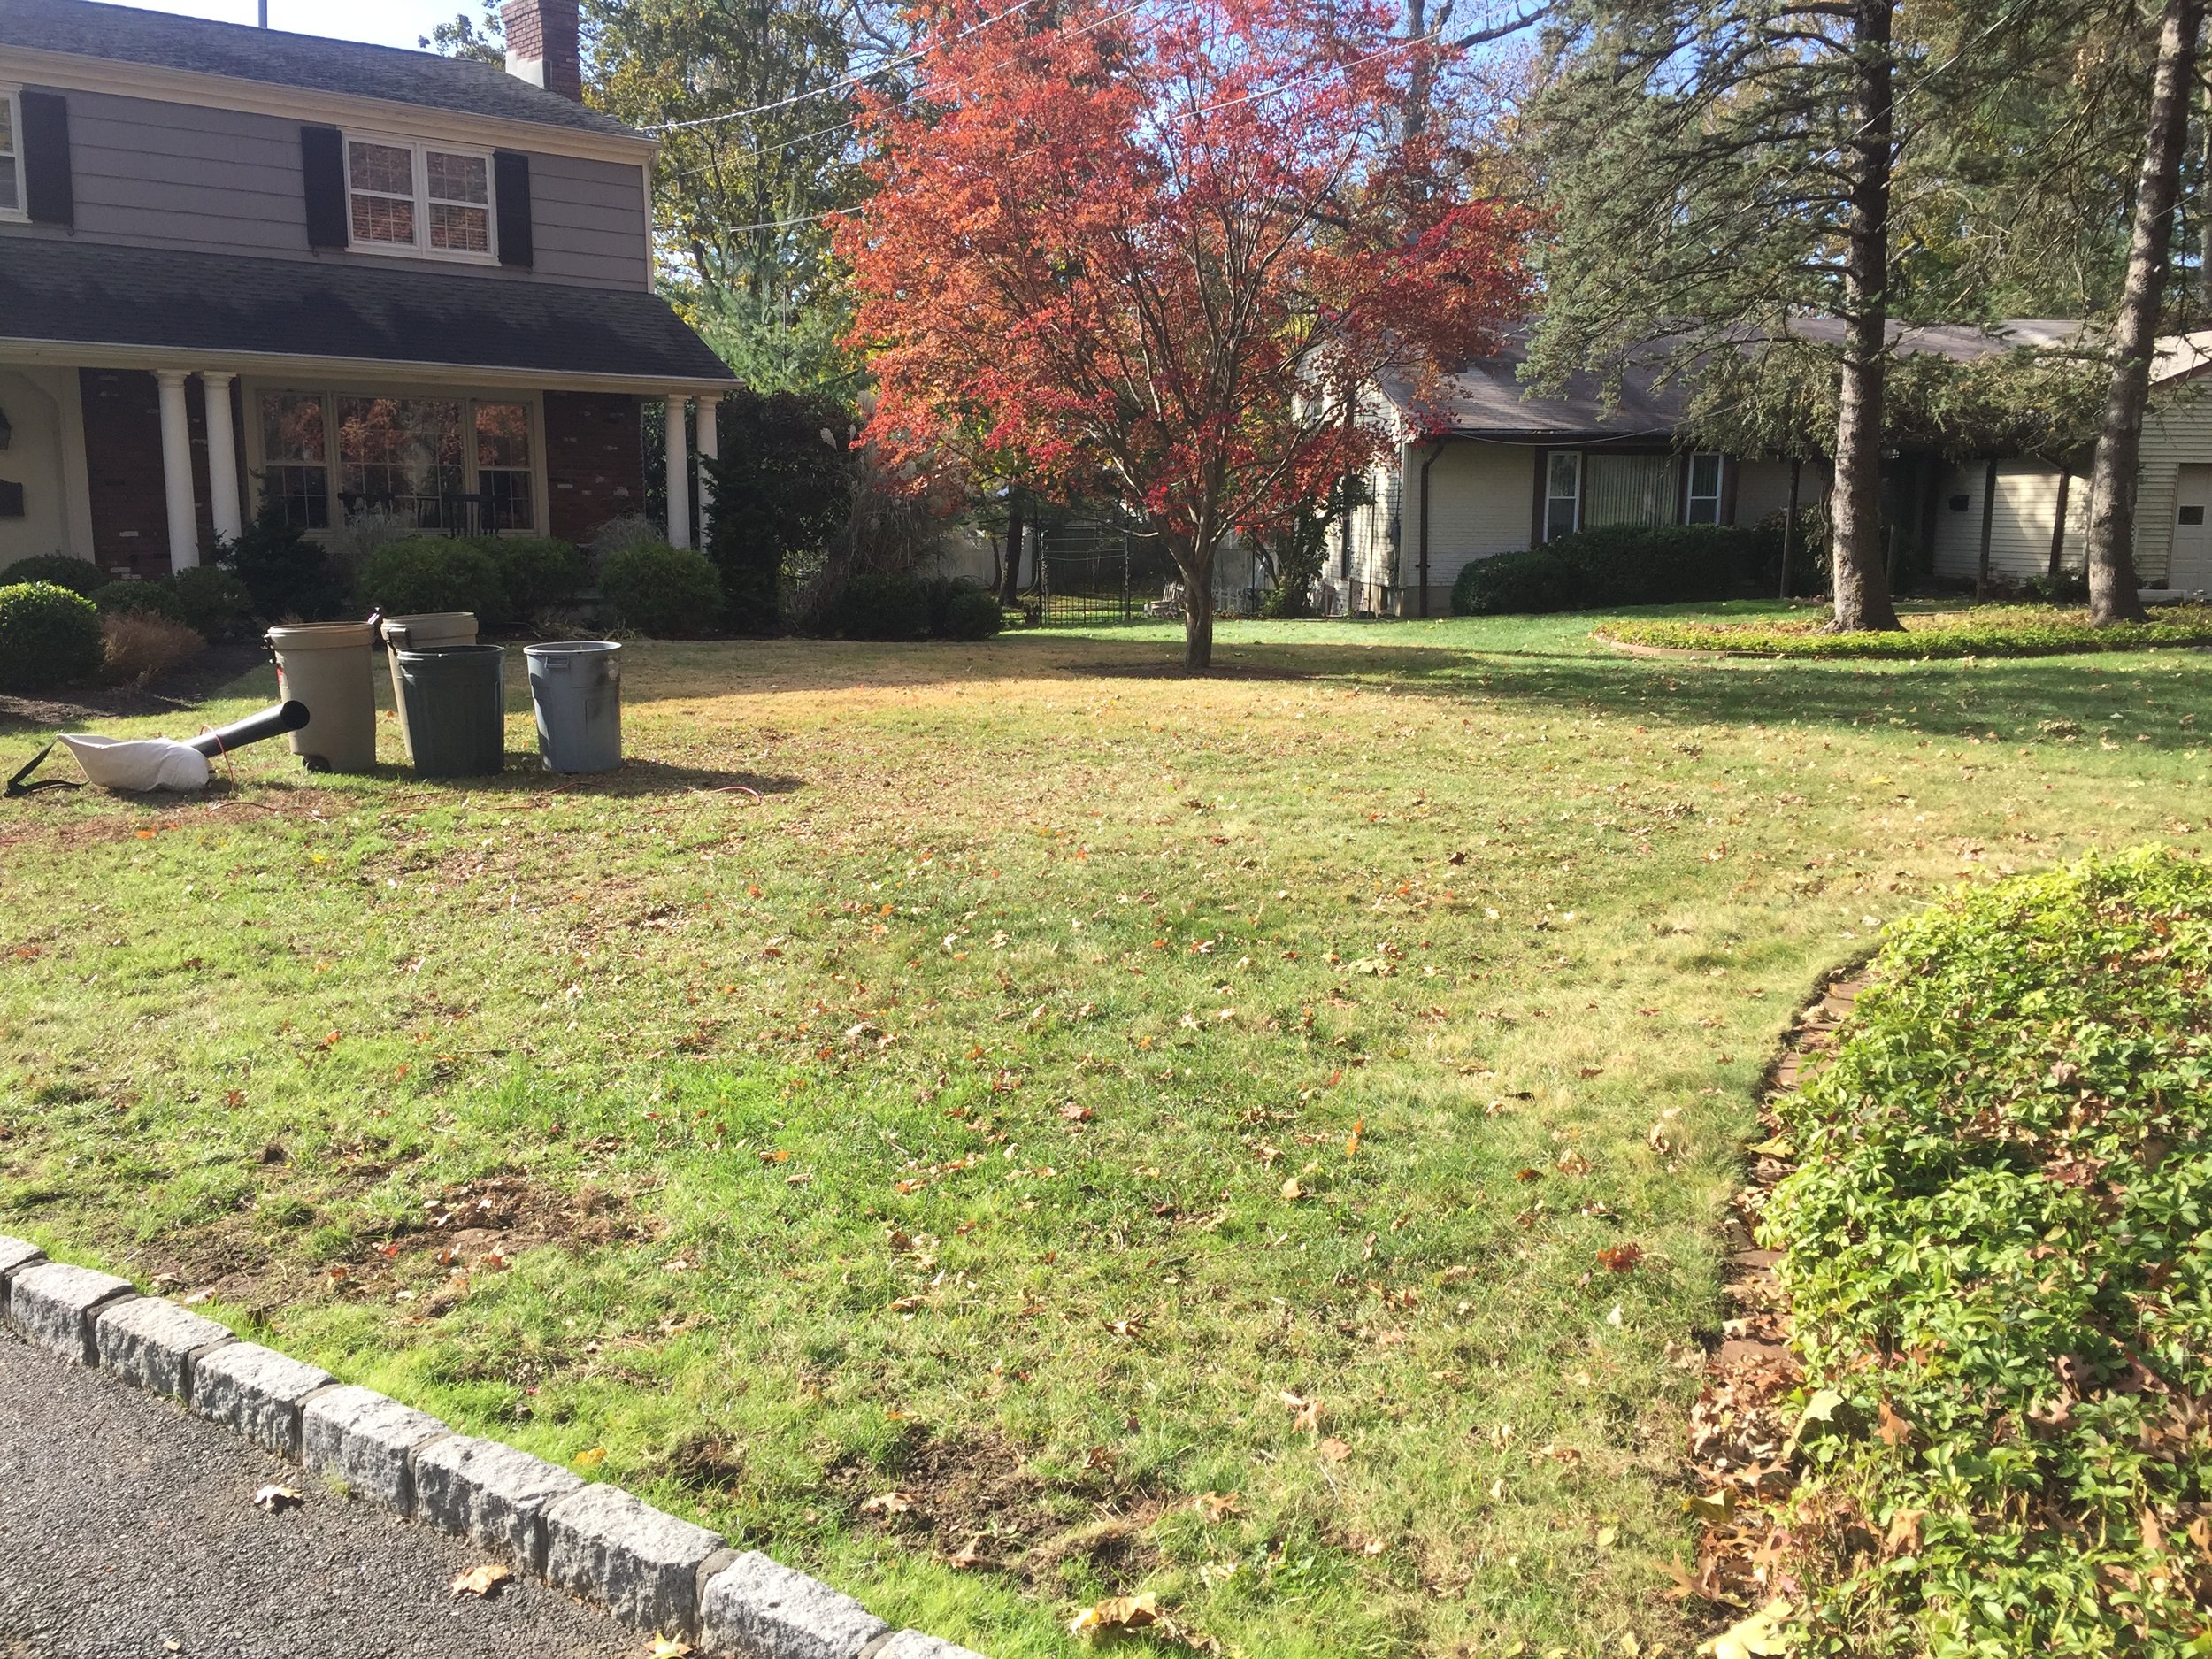 Mulched leaves on the lawn are virtually invisible